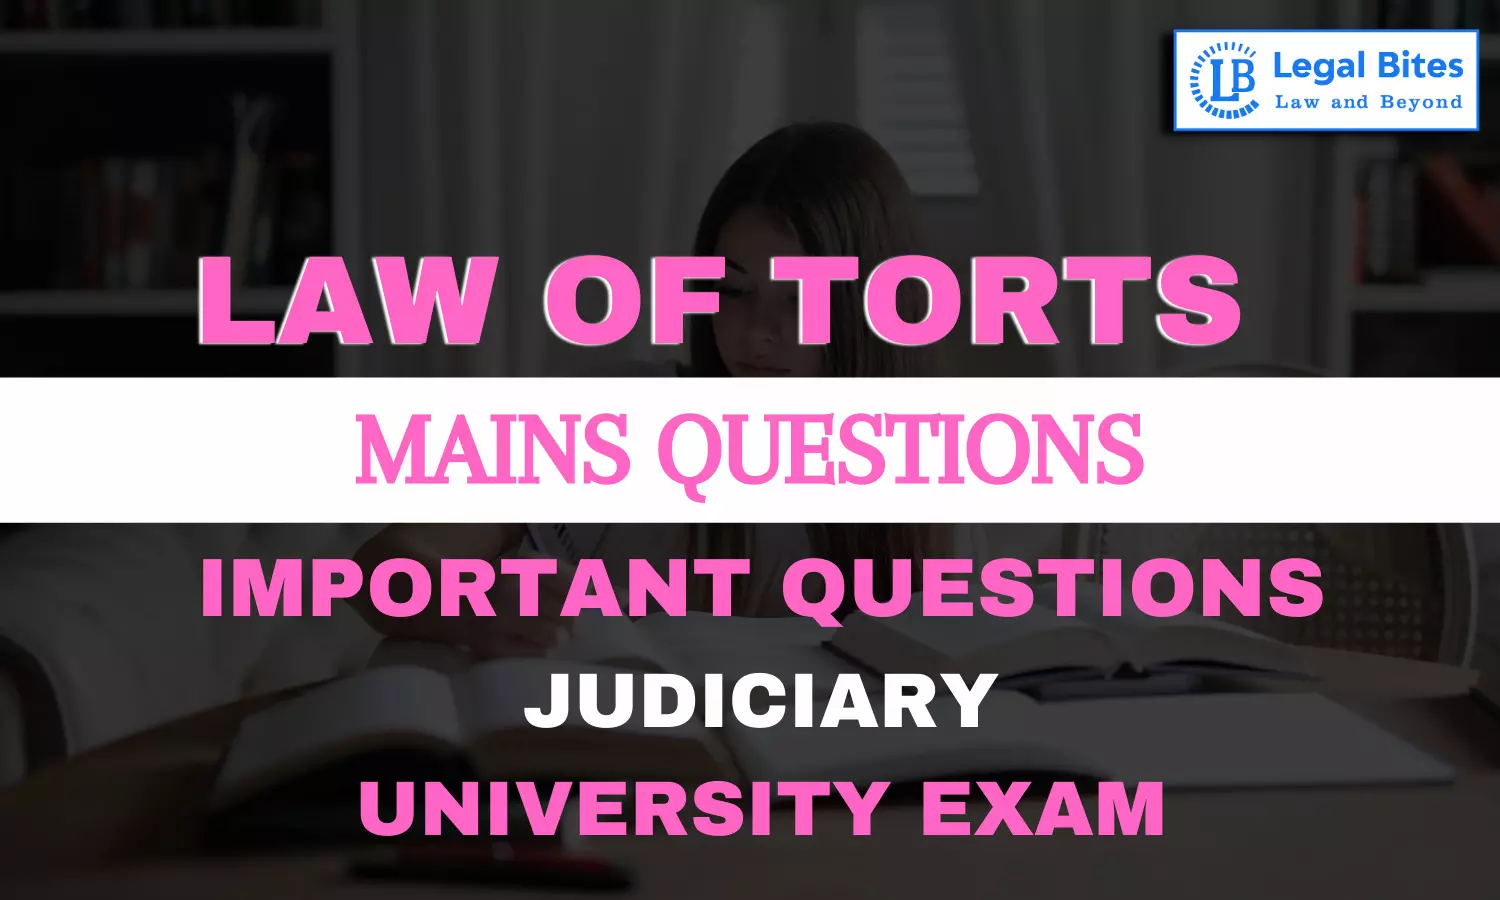 Explain the doctrine of remoteness of damage in the law of torts. In this context discuss the test of reasonable foresight and directness and state as to which principle is more practical and just.